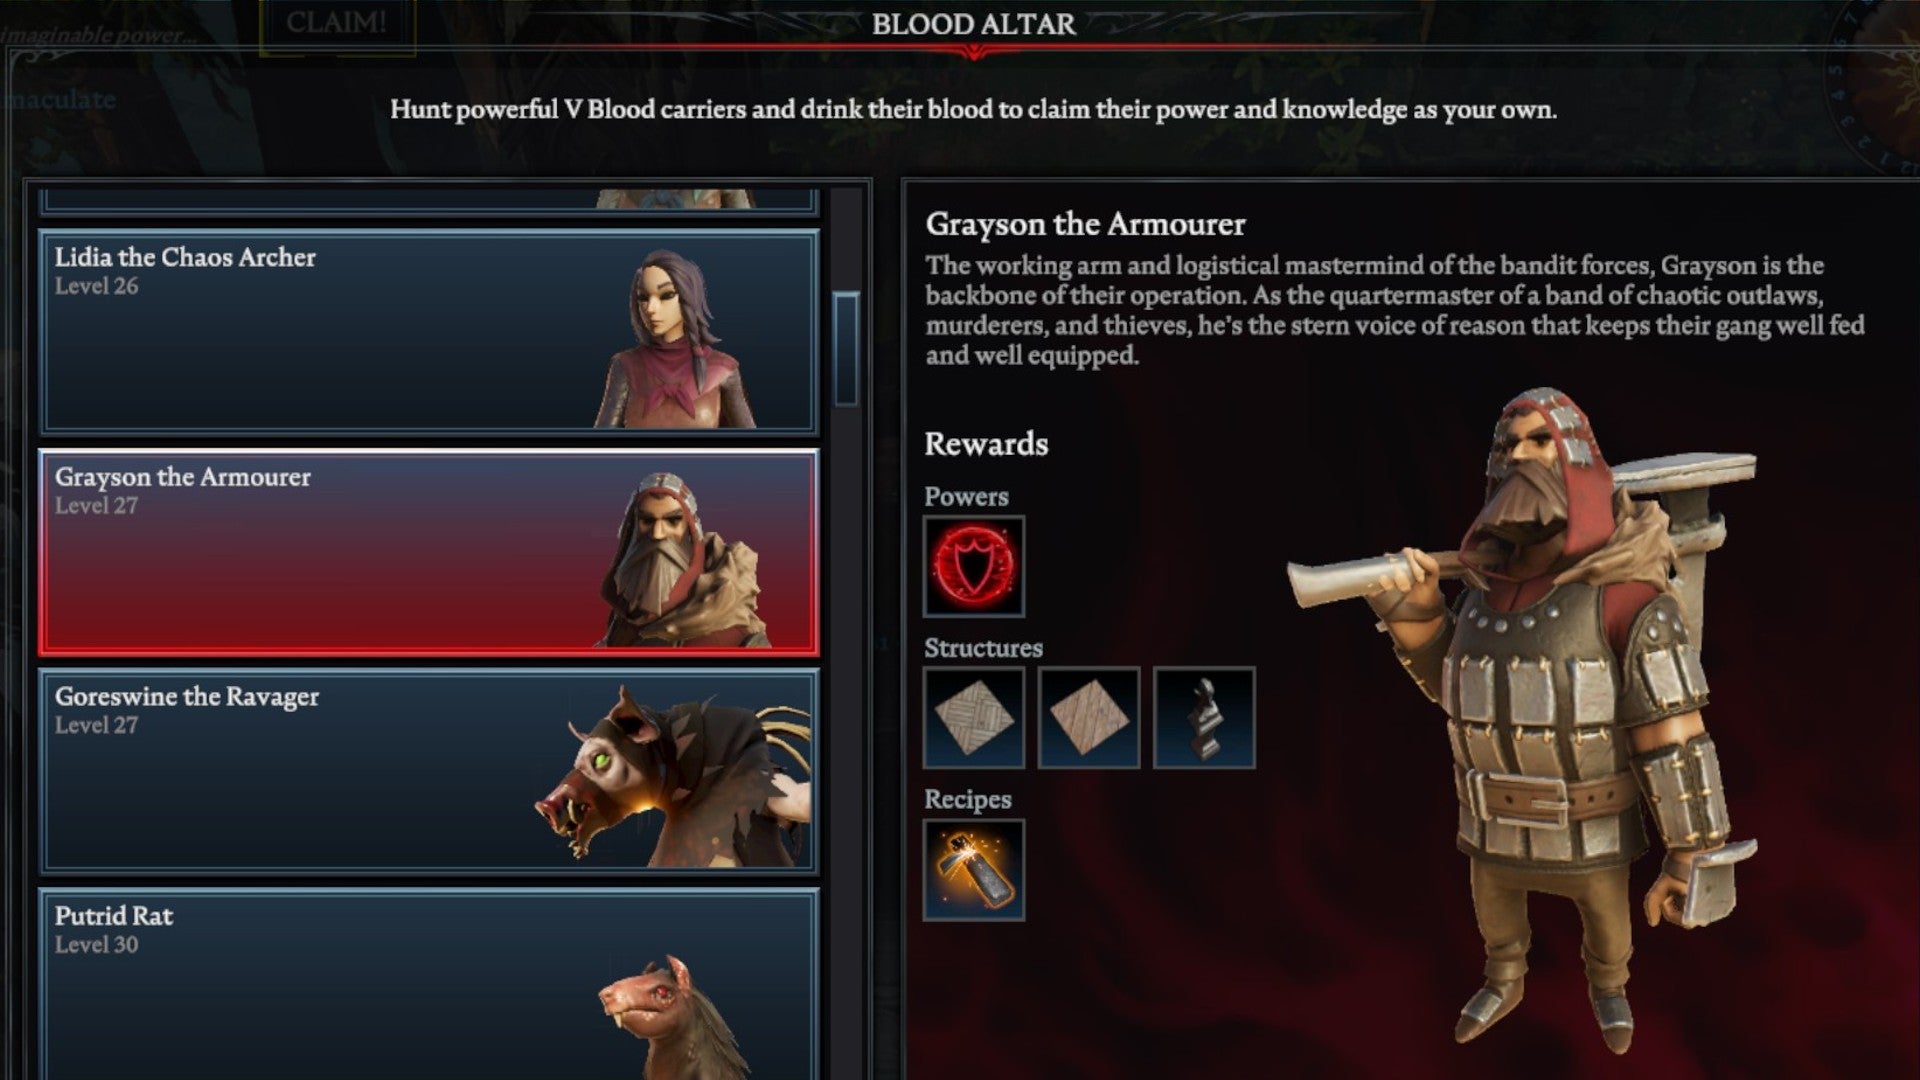 V Rising Grayson the Armourer Blood Altar tracking page, showing an image of the armourer on the right and a list of bosses on the left